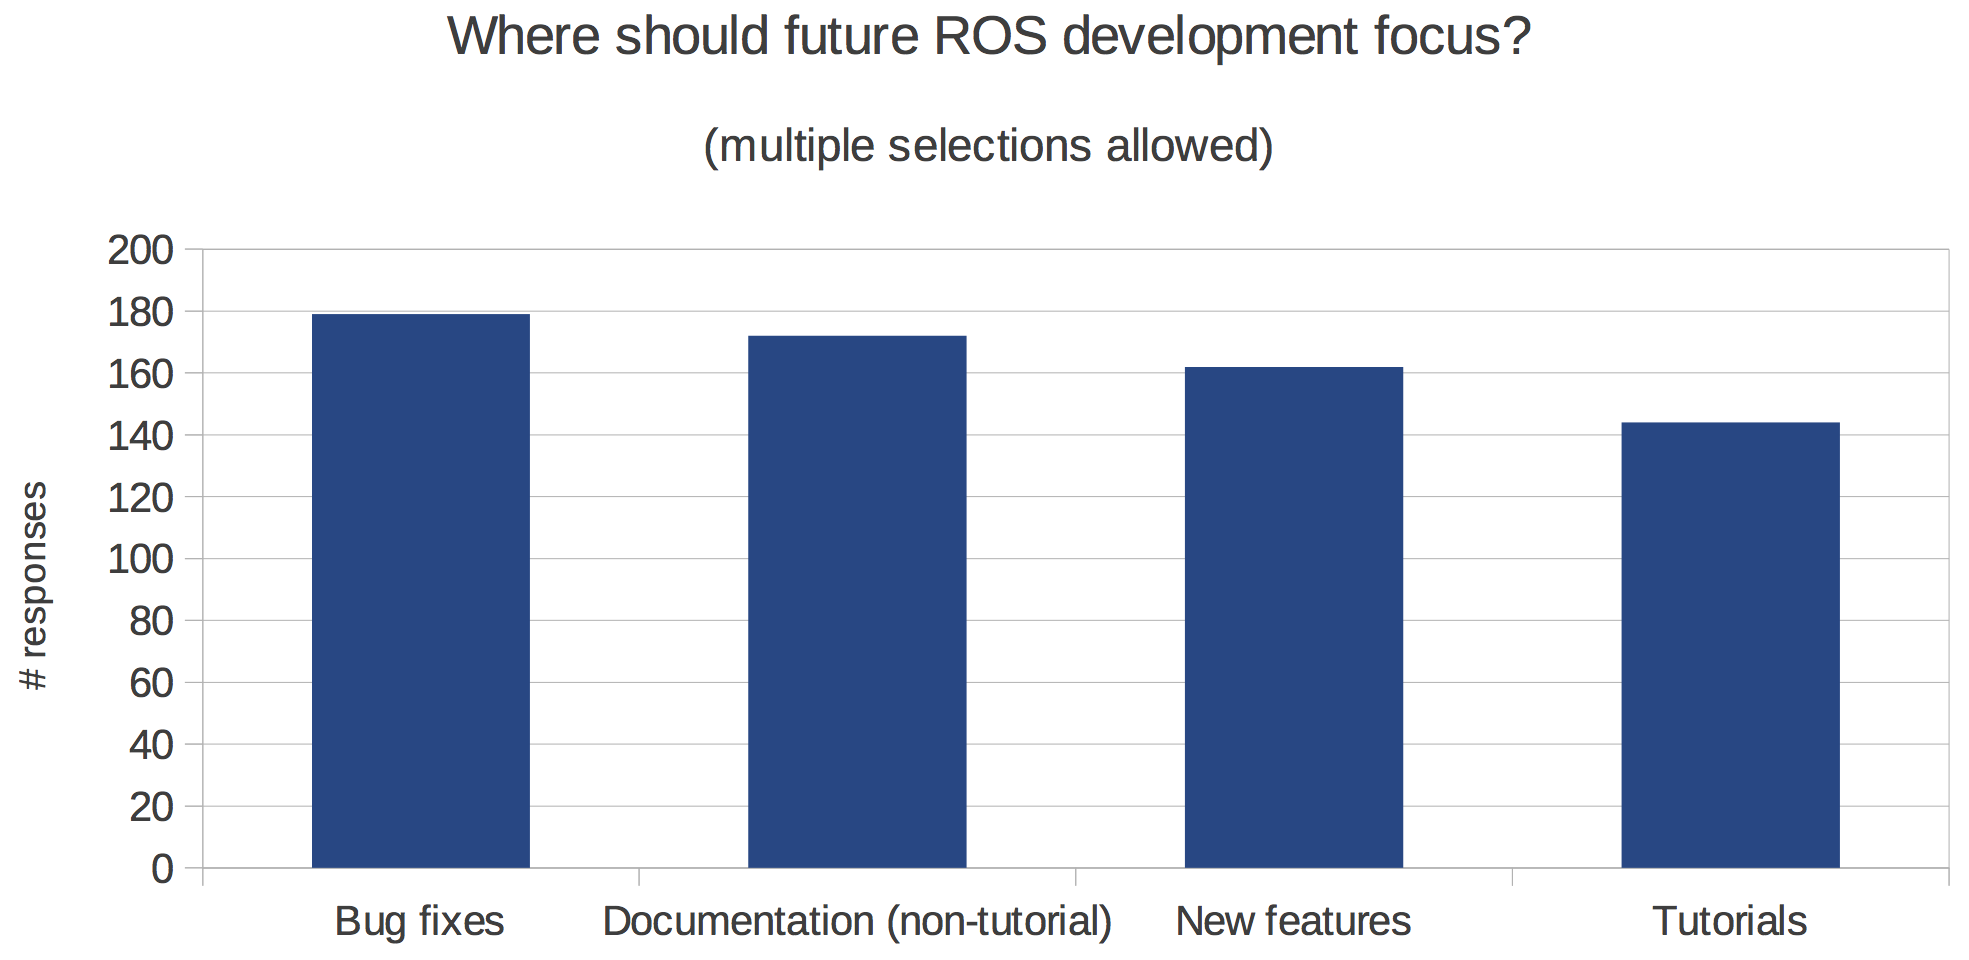 http://www.ros.org/news/2014/04/01/future-development.png